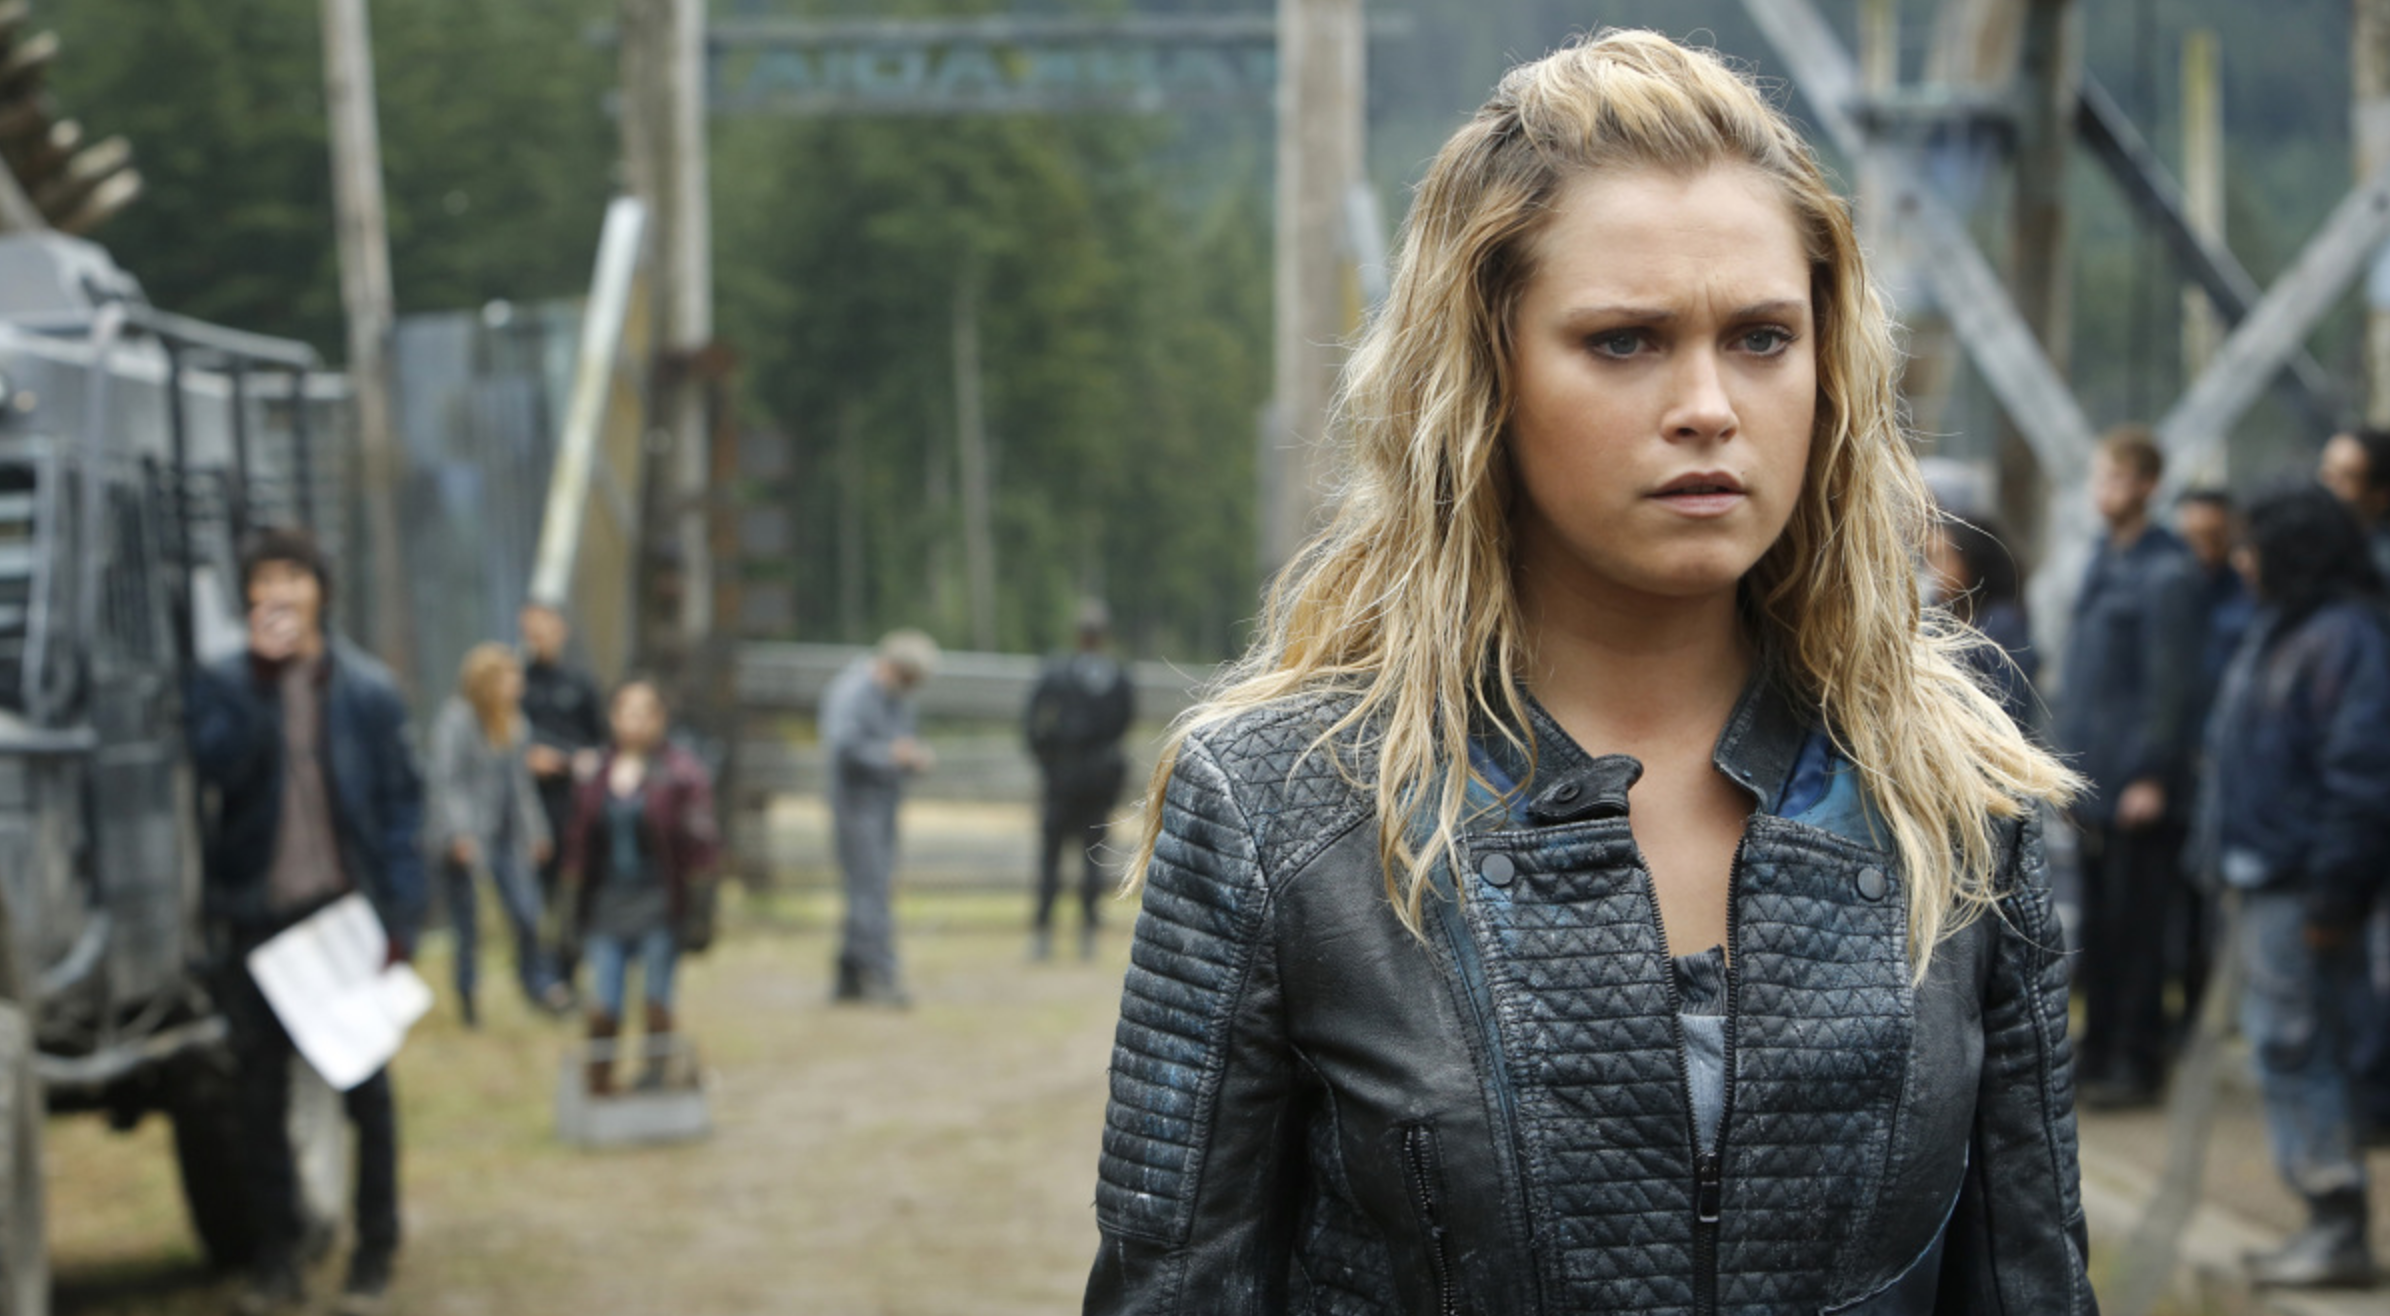 Clarke Griffin from "The 100" poses in front of their camp.
